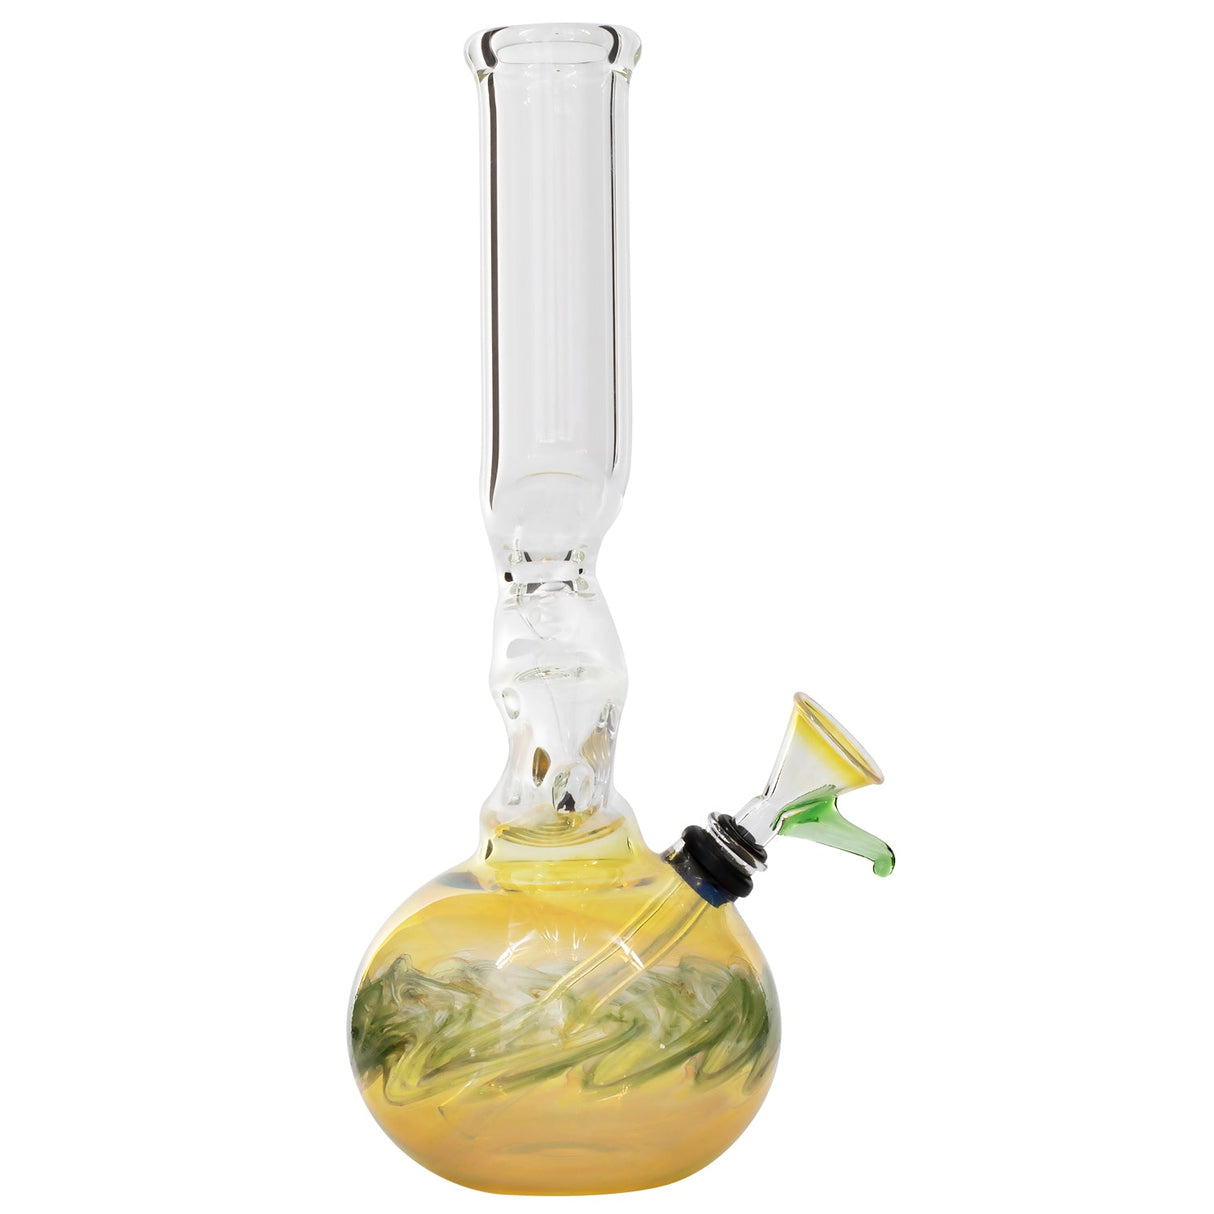 9 GLASS TOBACCO WATER PIPE TWISTING BALL & NECK